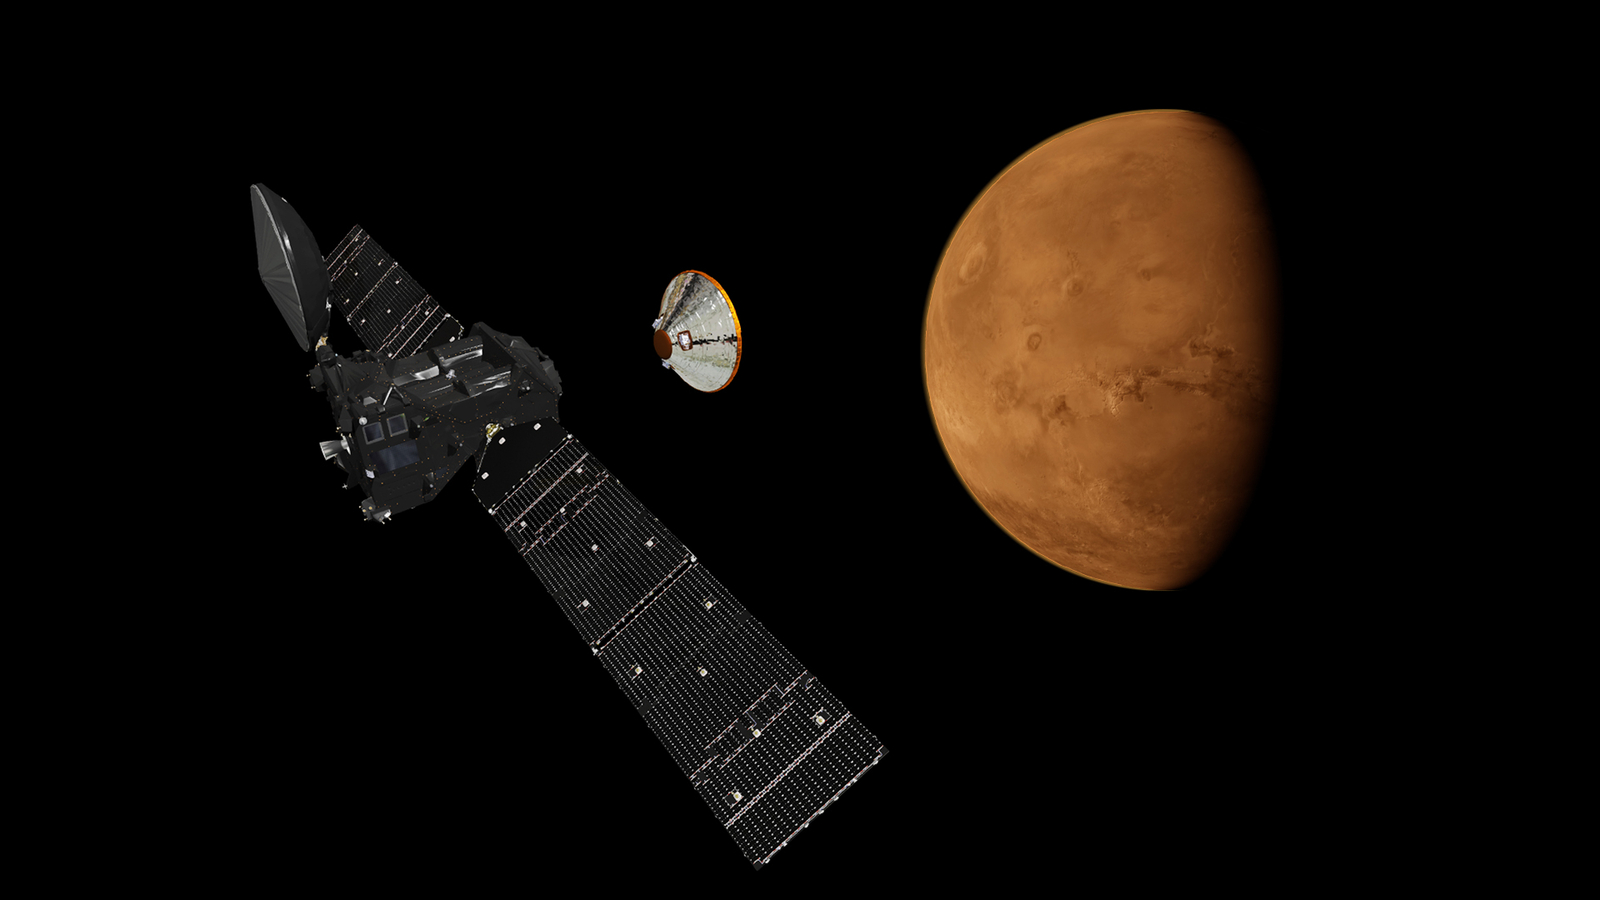 Artist's impression depicting the separation of the ExoMars 2016 entry, descent and landing demonstrator module, named Schiaparelli, from the Trace Gas Orbiter, and heading for Mars.